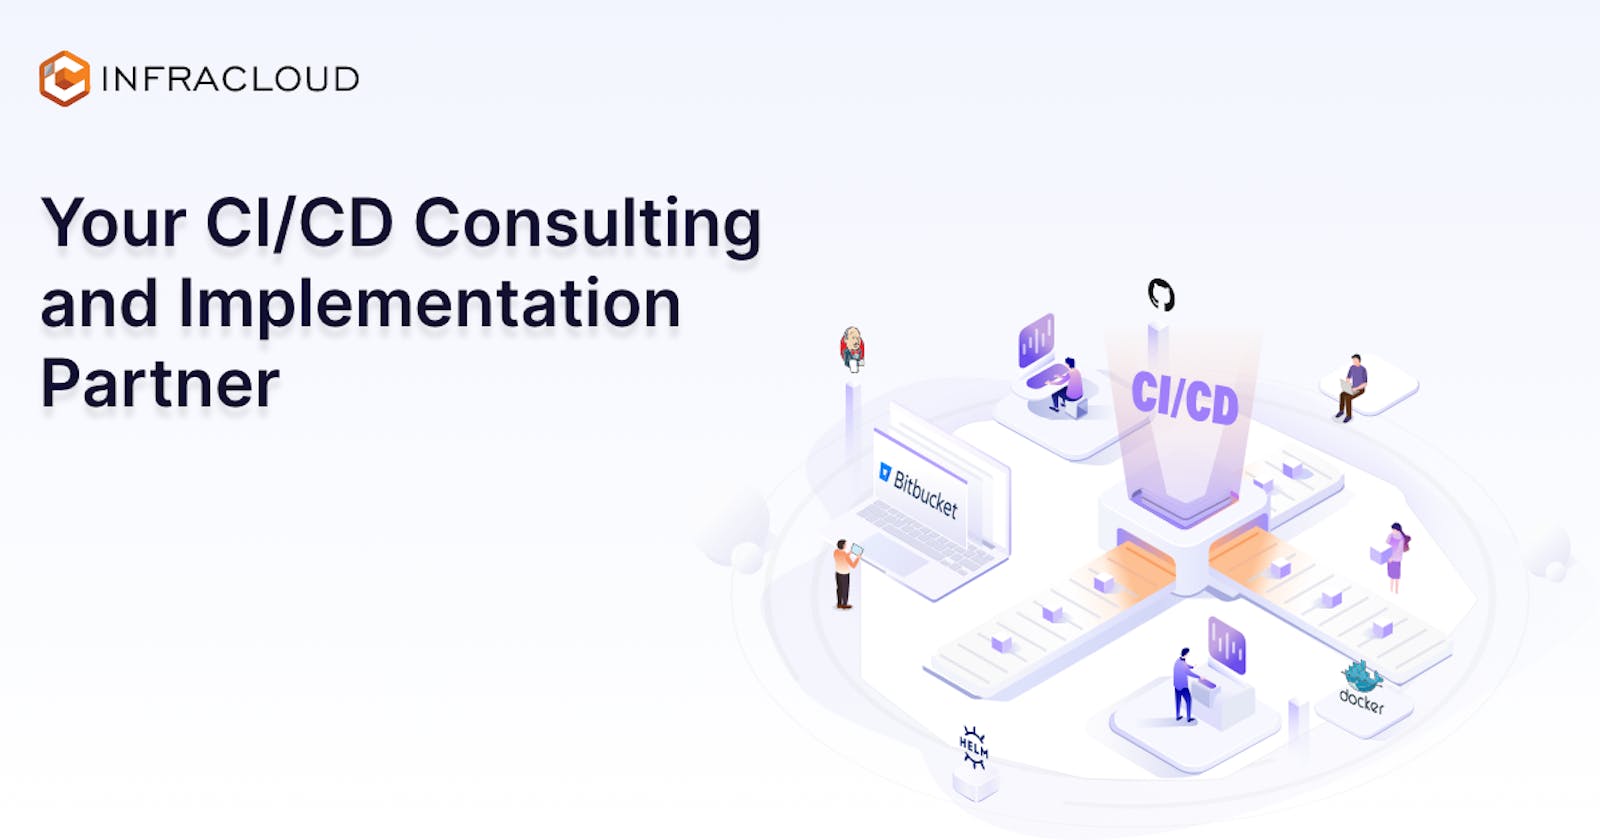 CI/CD Consulting Services for DevOps Automation